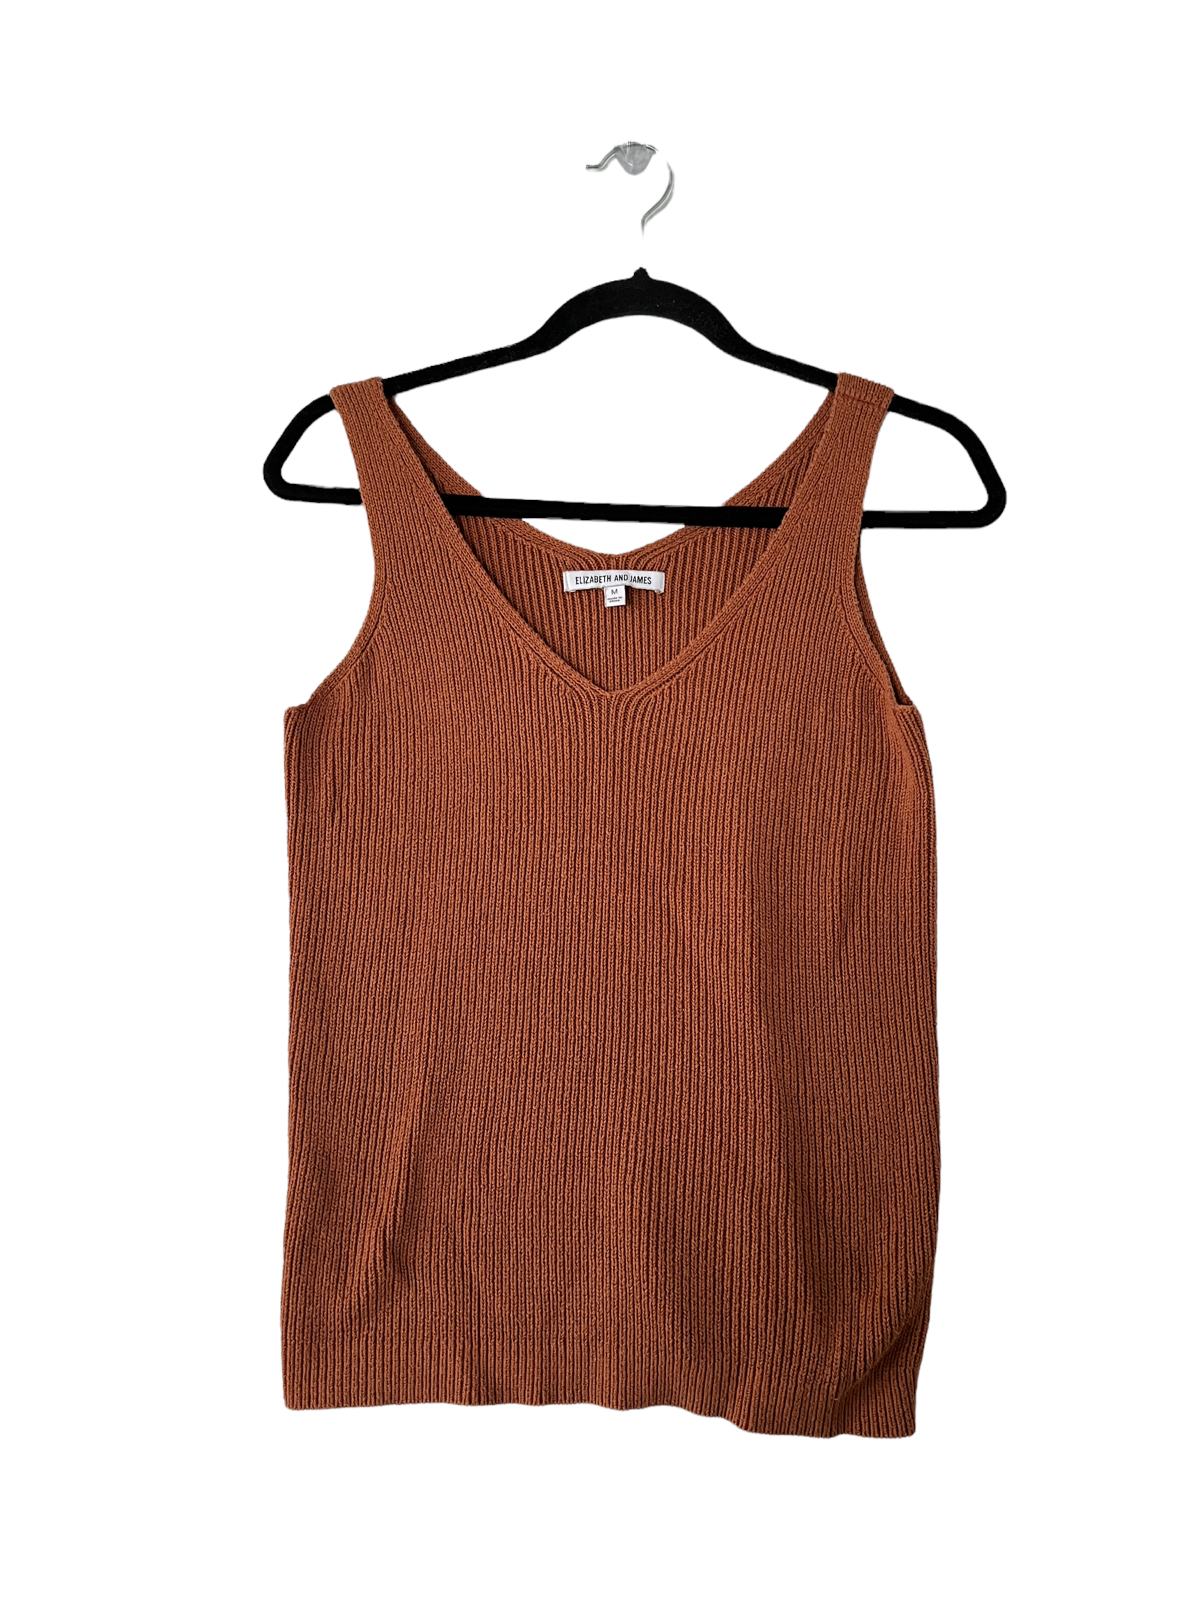 Primary image for ELIZABETH AND JAMES Womens Top Brown Ribbed Knit Tank Sweater Sleeveless Size M